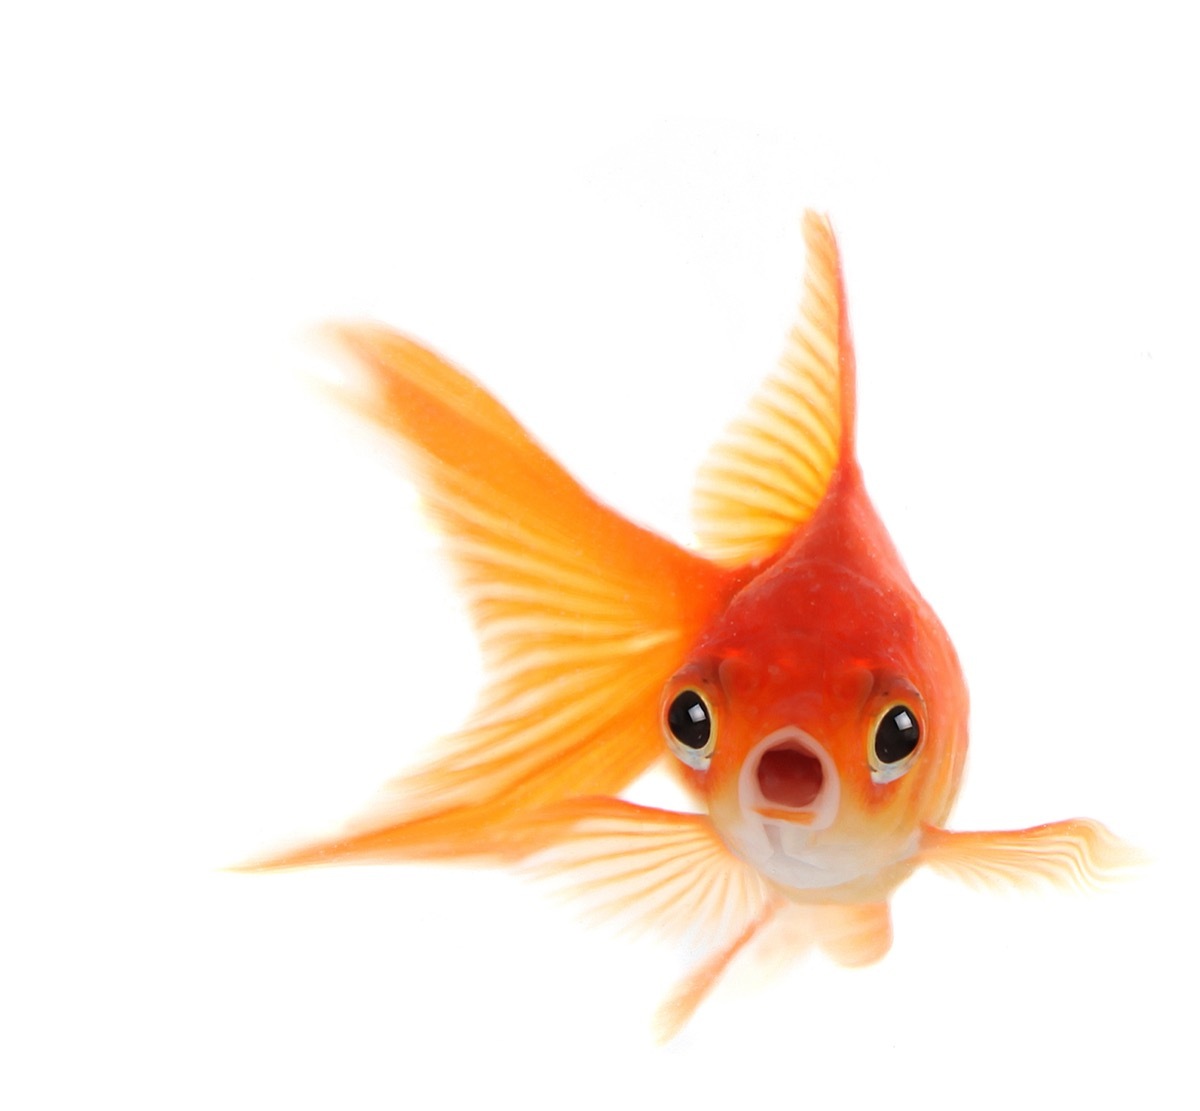 Goldfish With Shocked Look on His Face.